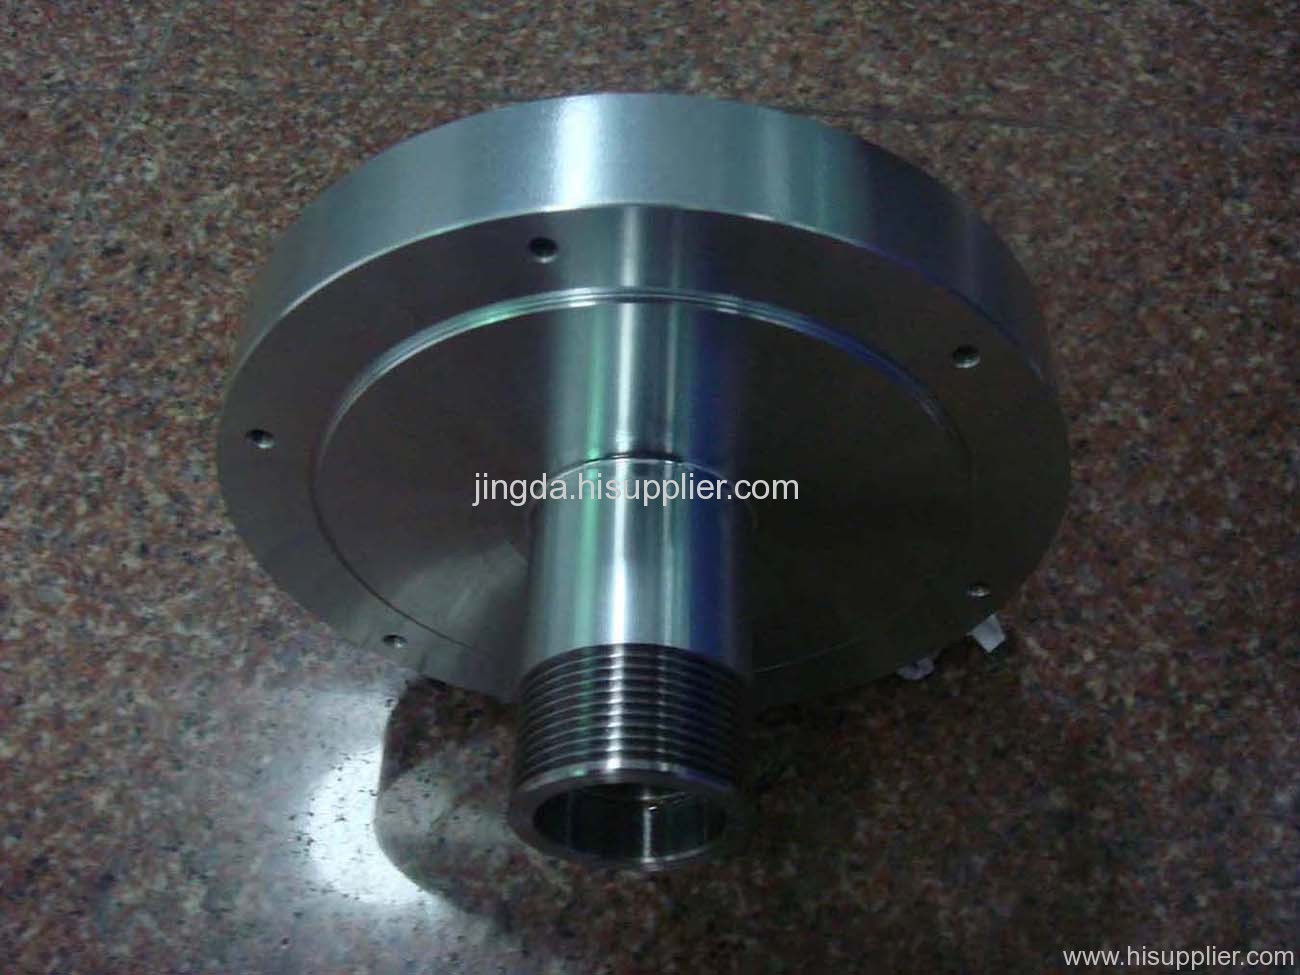 cnc precision industrial components flywheel housing maker